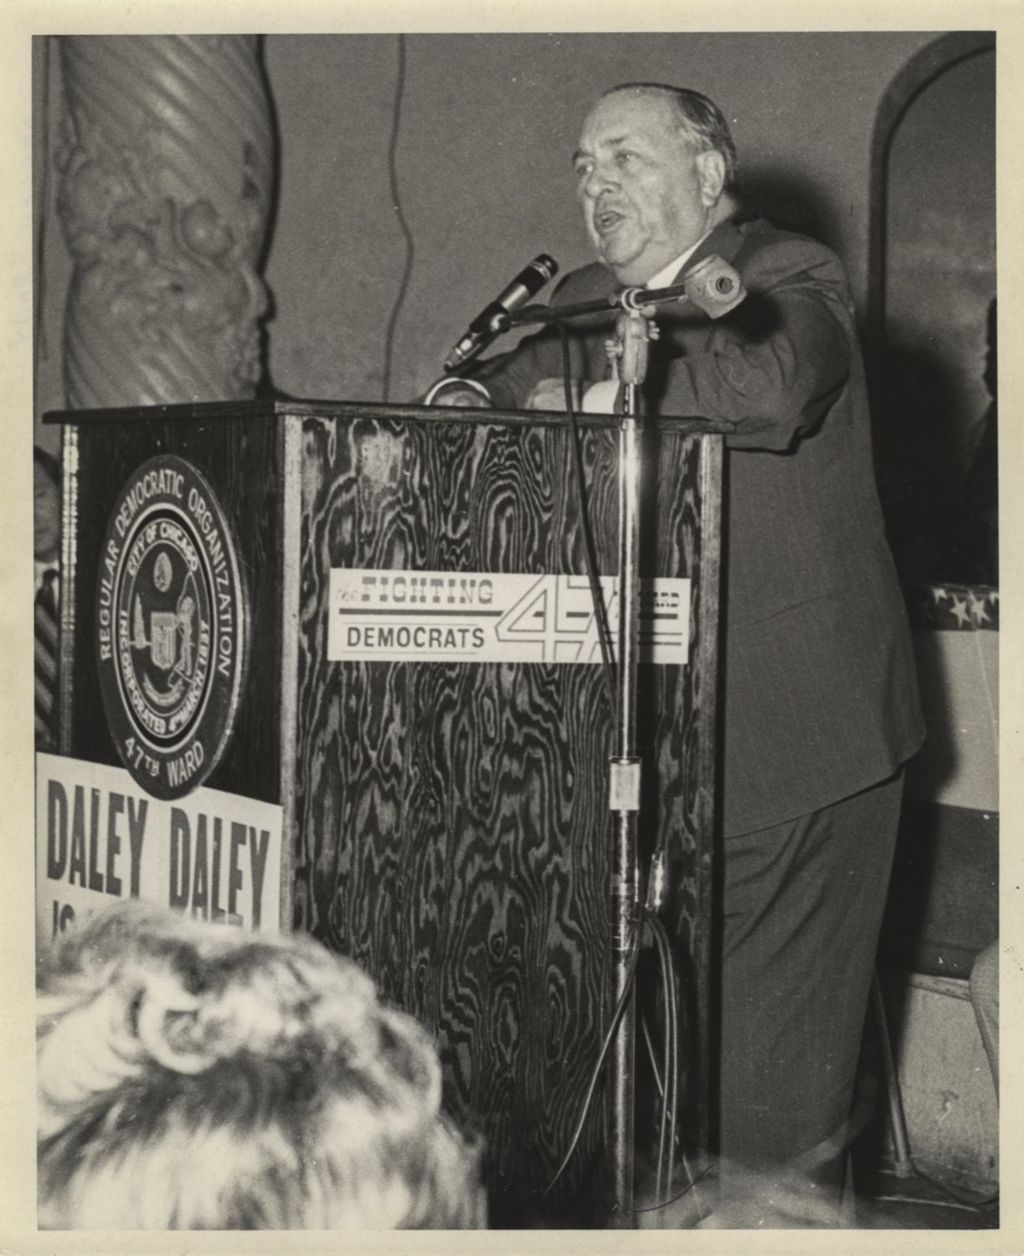 Re-election rally at the Aragon Ballroom, Richard J. Daley speaking